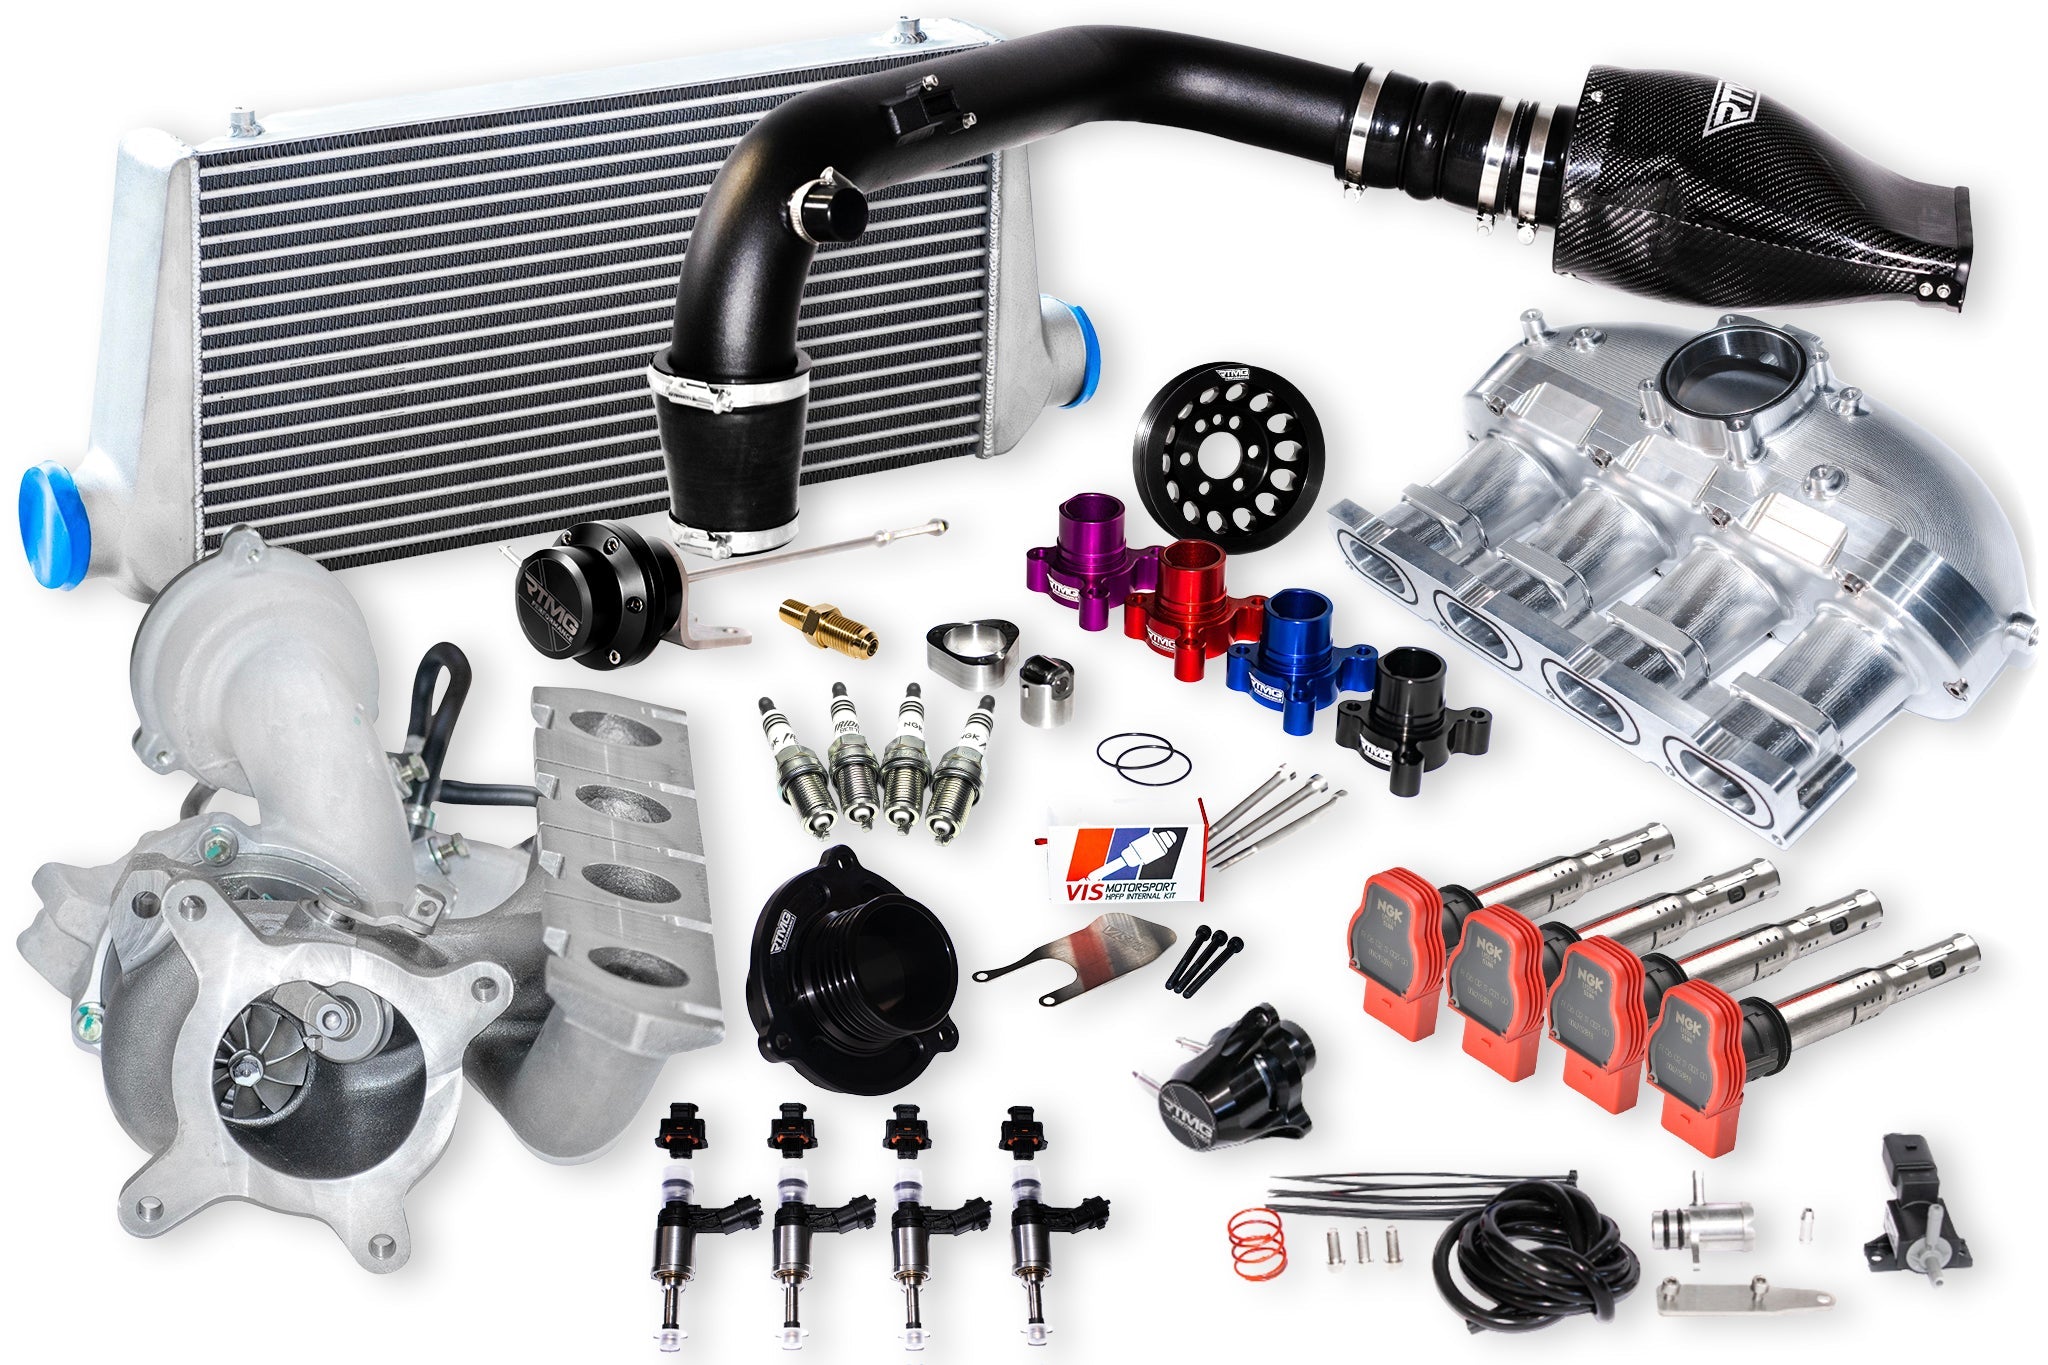 Stage 3 Tuning Kit for 2.0 TFSI EA113 - Up to 480 HP - RTMG Performance